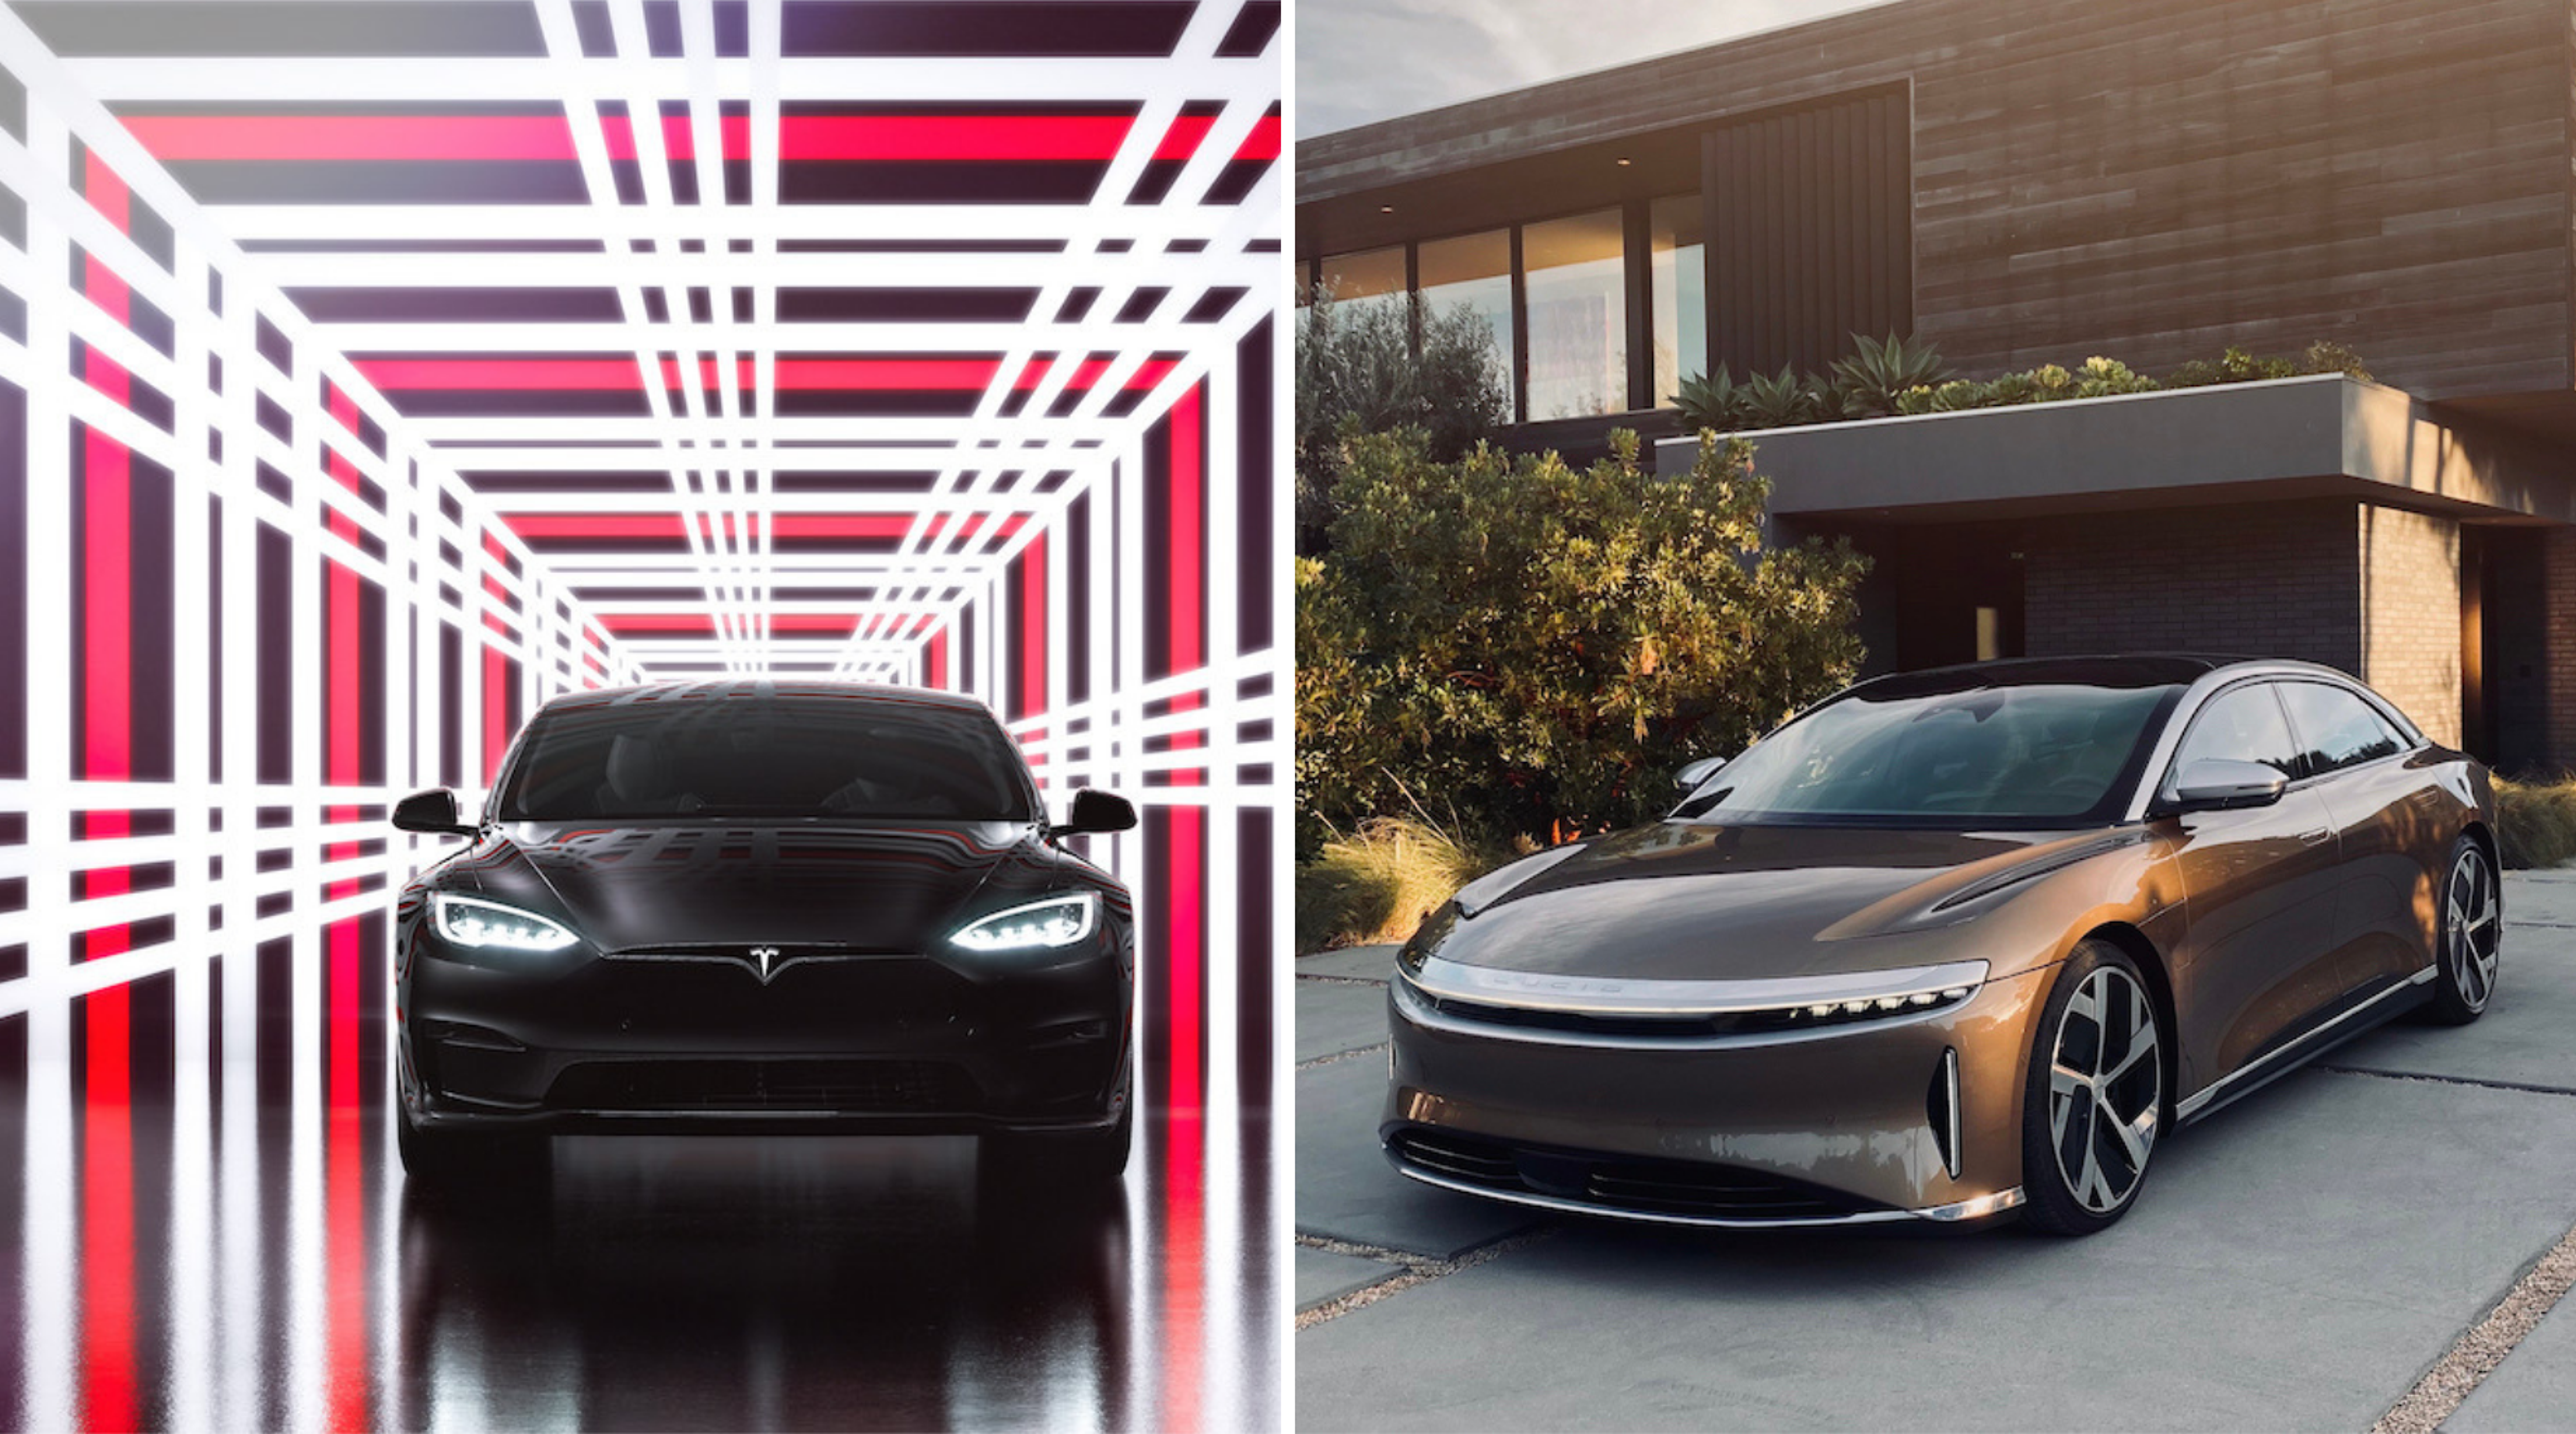 So Does Tesla Or Lucid Make The Cooler-Looking Electric Vehicle?